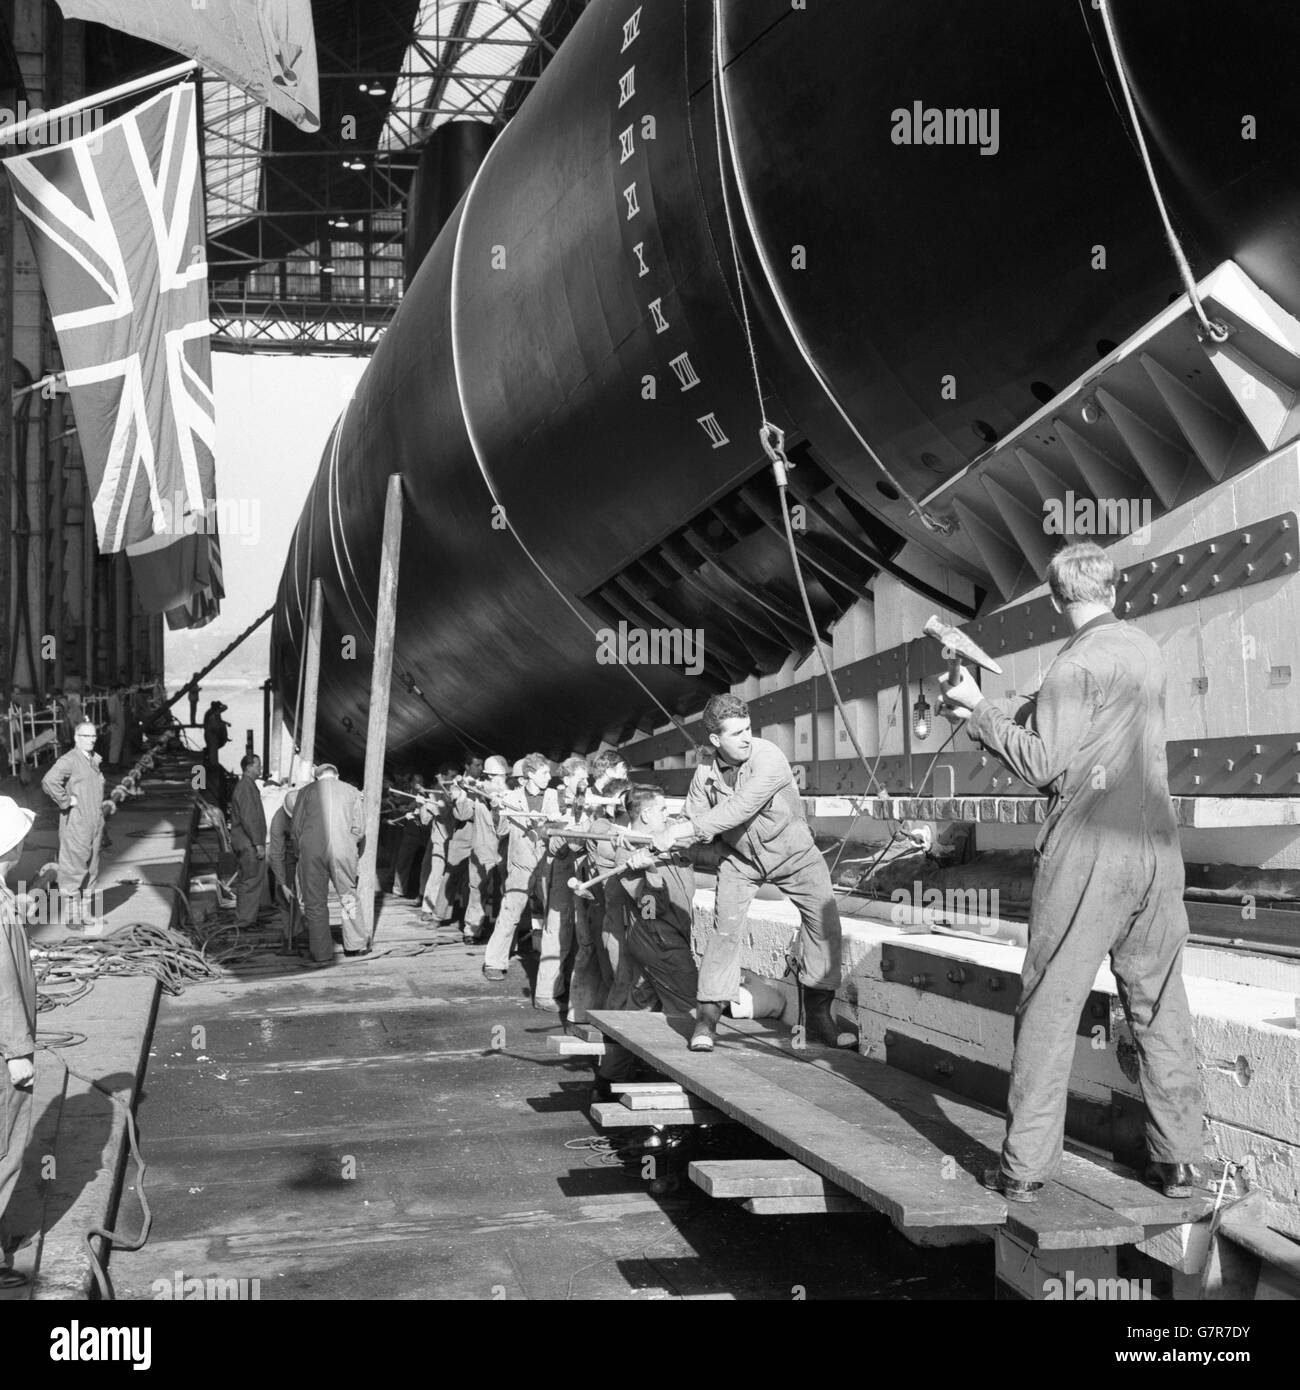 The setting up ceremony at HM Dockyard, Chatham, Kent, as shipwrights, working in unison, raise the submarine Okanagan on the launching way by hammering wedges under the launching cradle. She will be named by Madame Cadieux, wife of the Associate Minister of National Defence for Canada. Okanagan is the third and last of the present series of Oberon class submarines built for Canada. She will be ready for service in about a year. Stock Photo